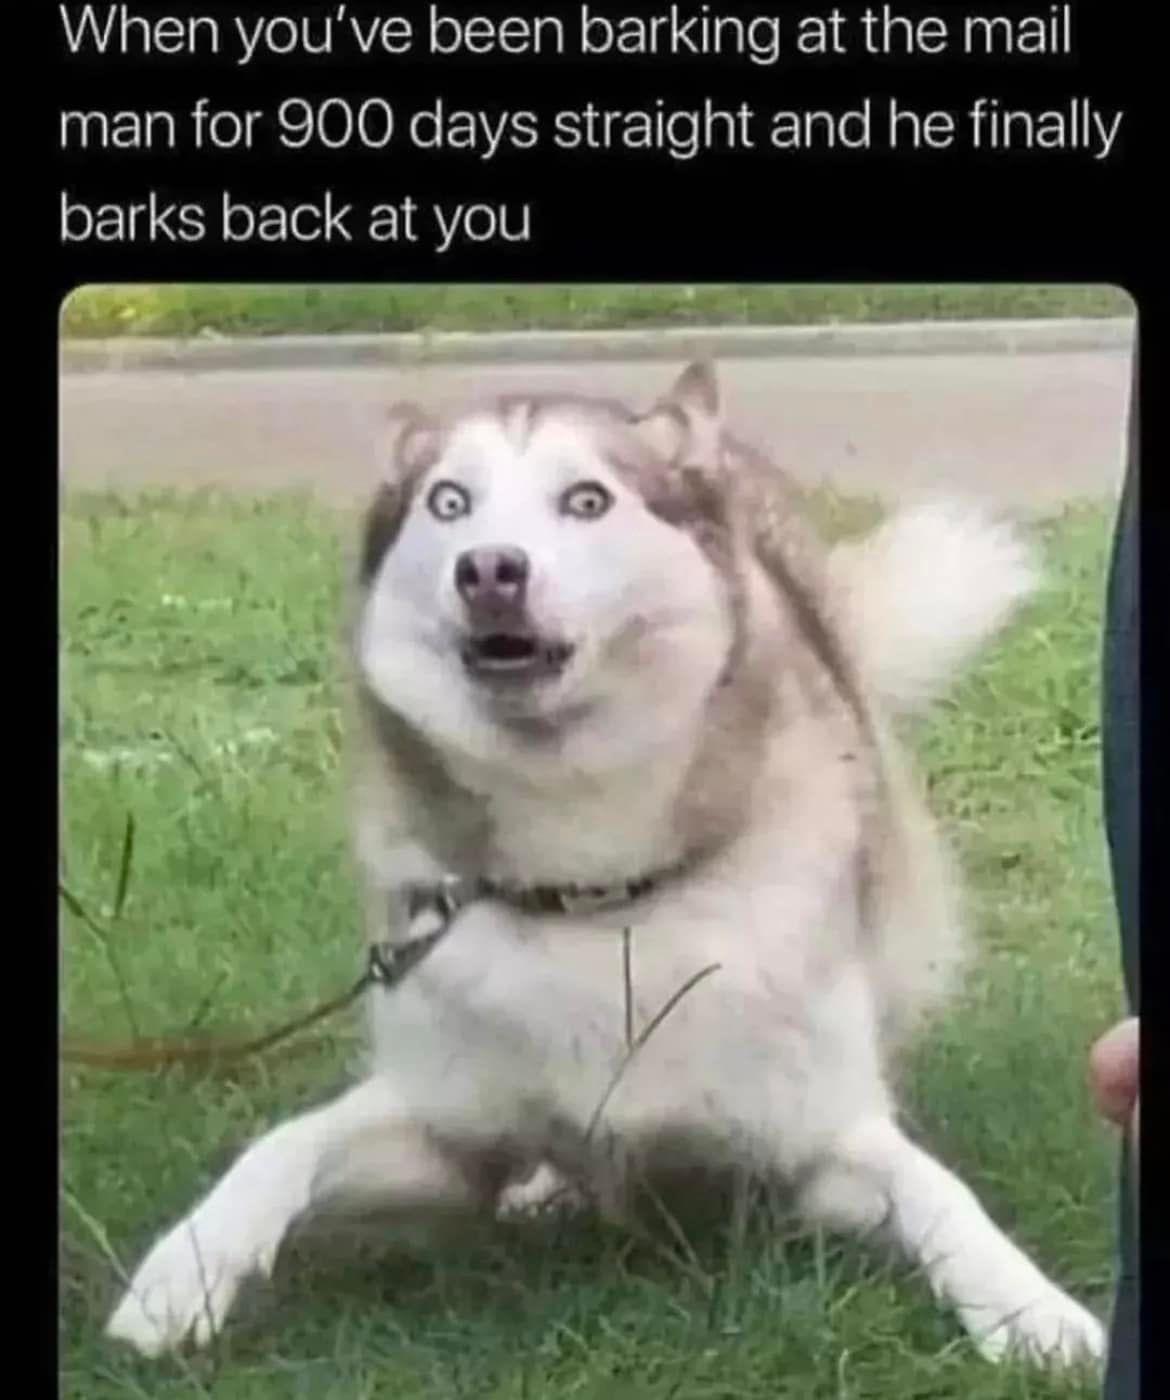 funny memes - you ve been barking at the mailman - When you've been barking at the mail man for 900 days straight and he finally barks back at you